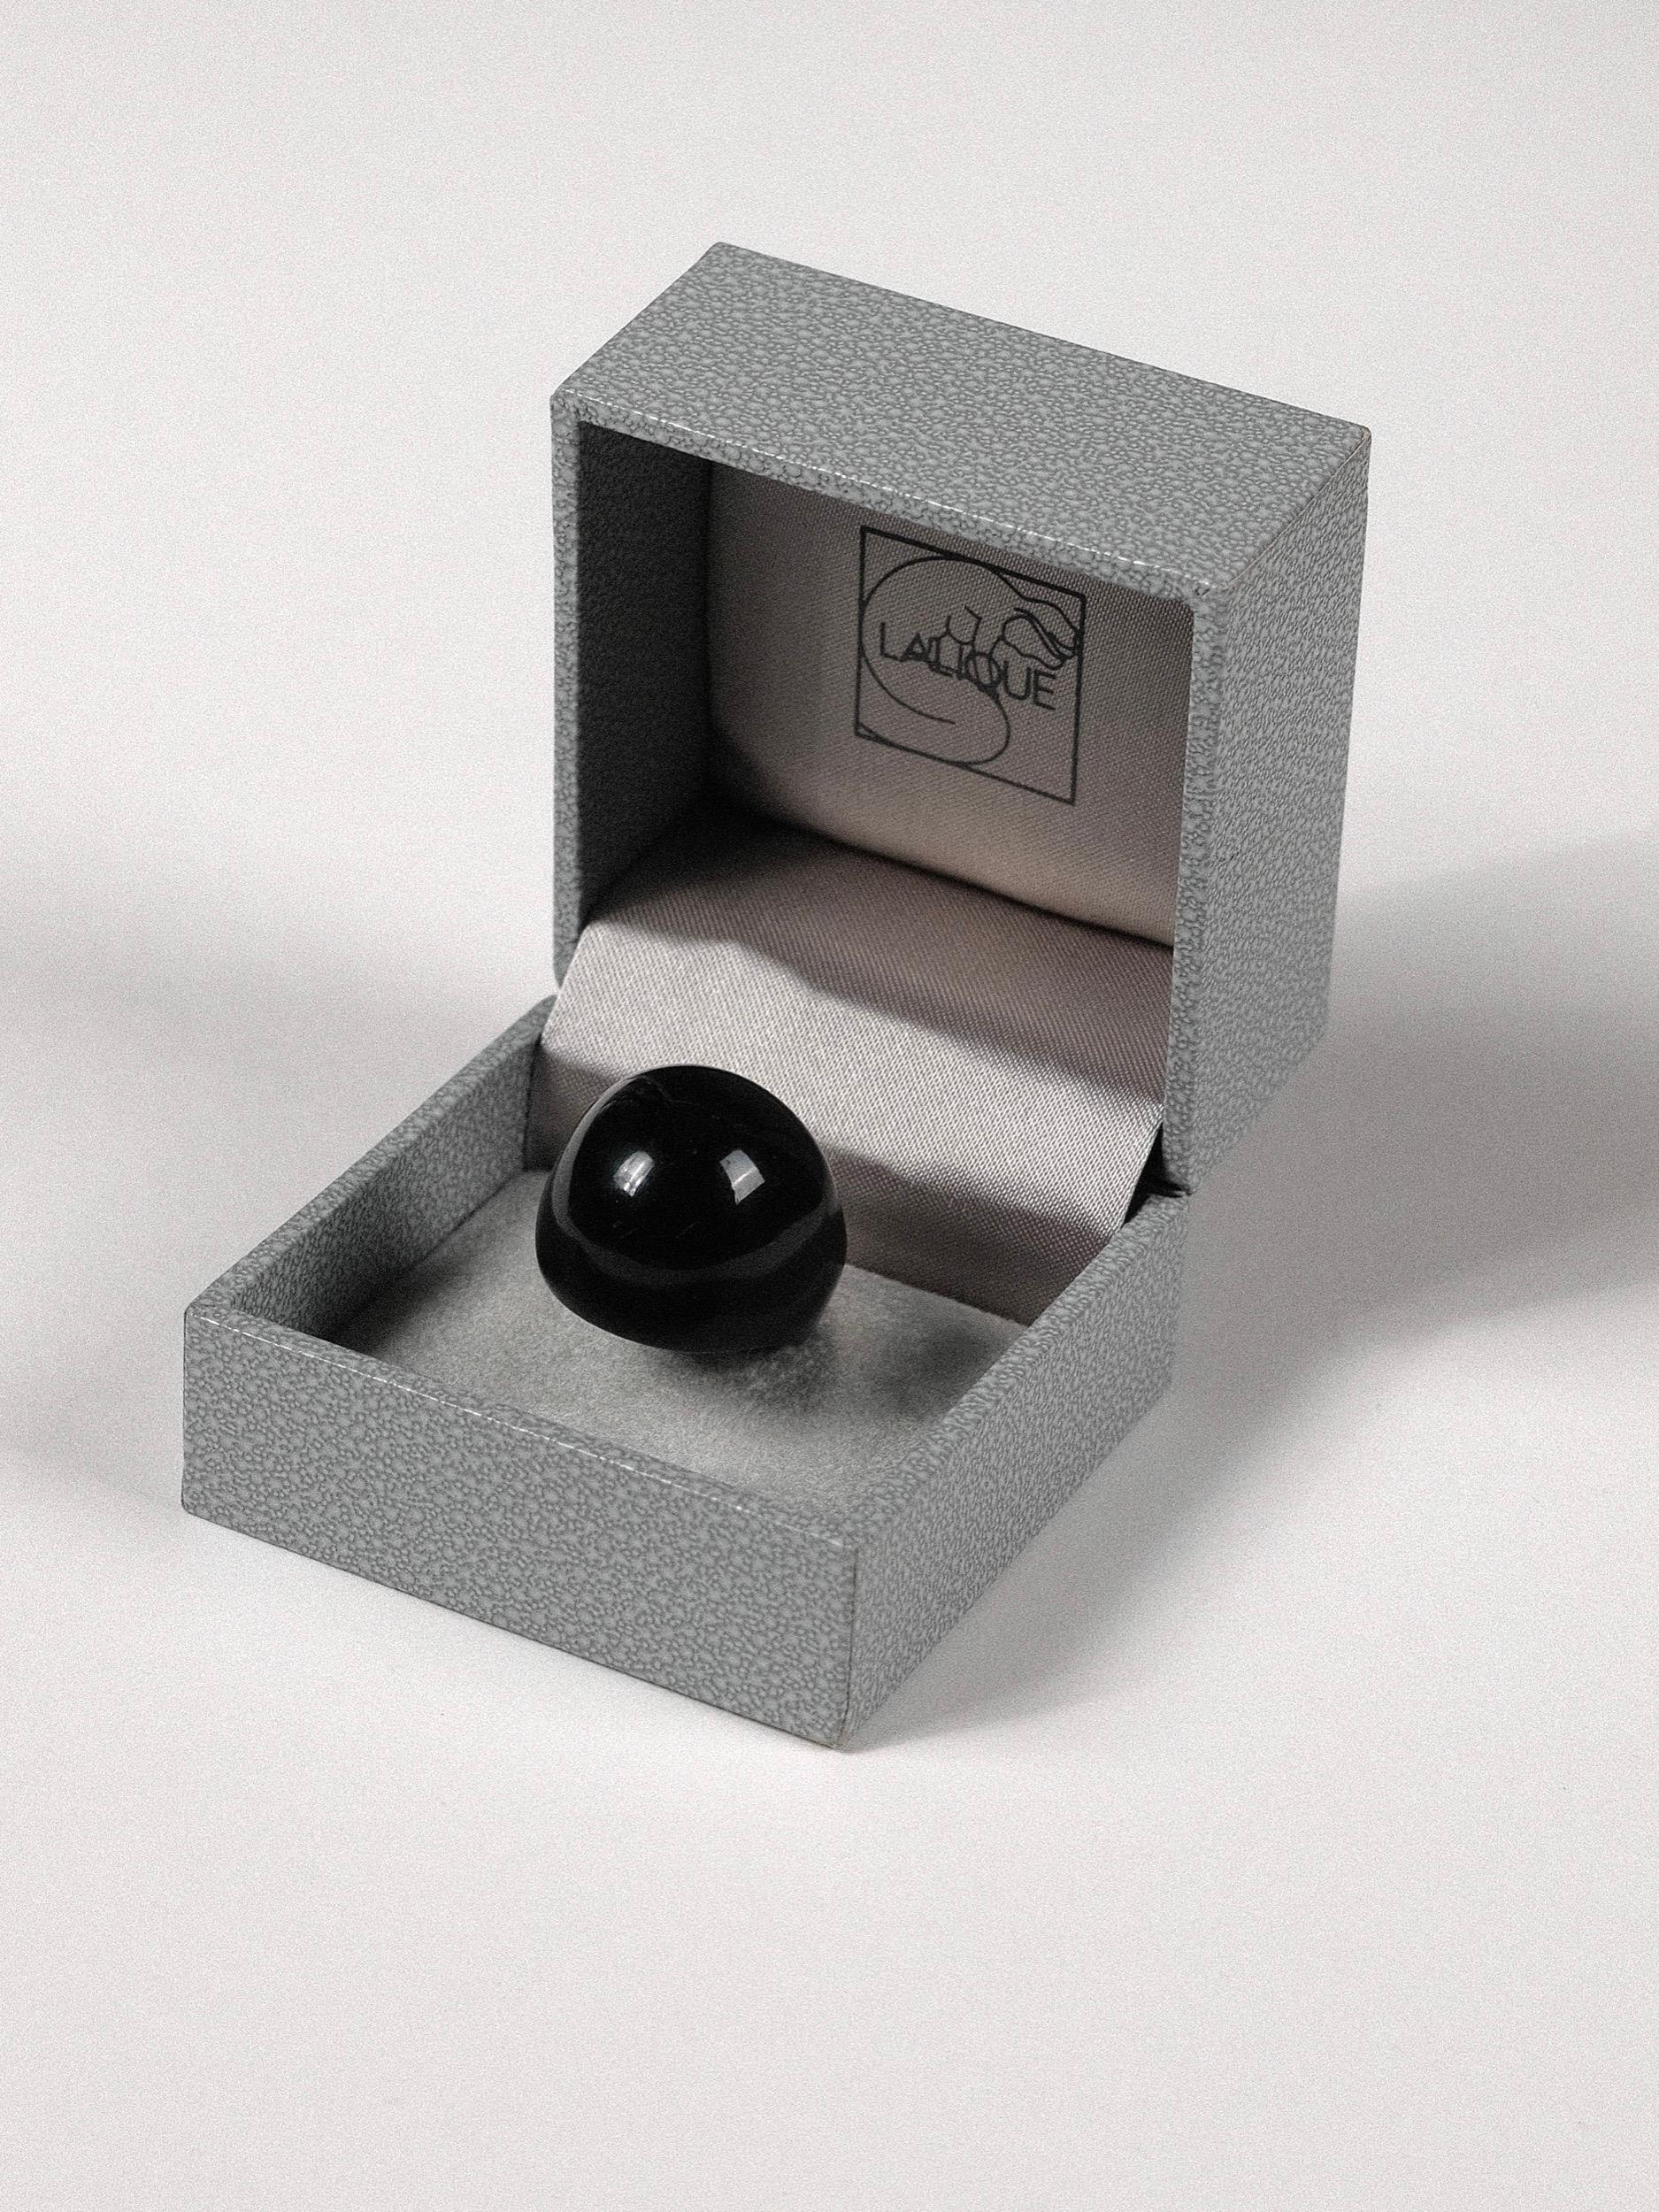 Classic and Quintessential Lalique Gourmande Cabochon Glass Ring in Black Glass
Designed by René Lalique in 1931, evoking the Art Deco era with its volutious form and assortment of colorways, the box dates this ring to the post 2000 era
Box